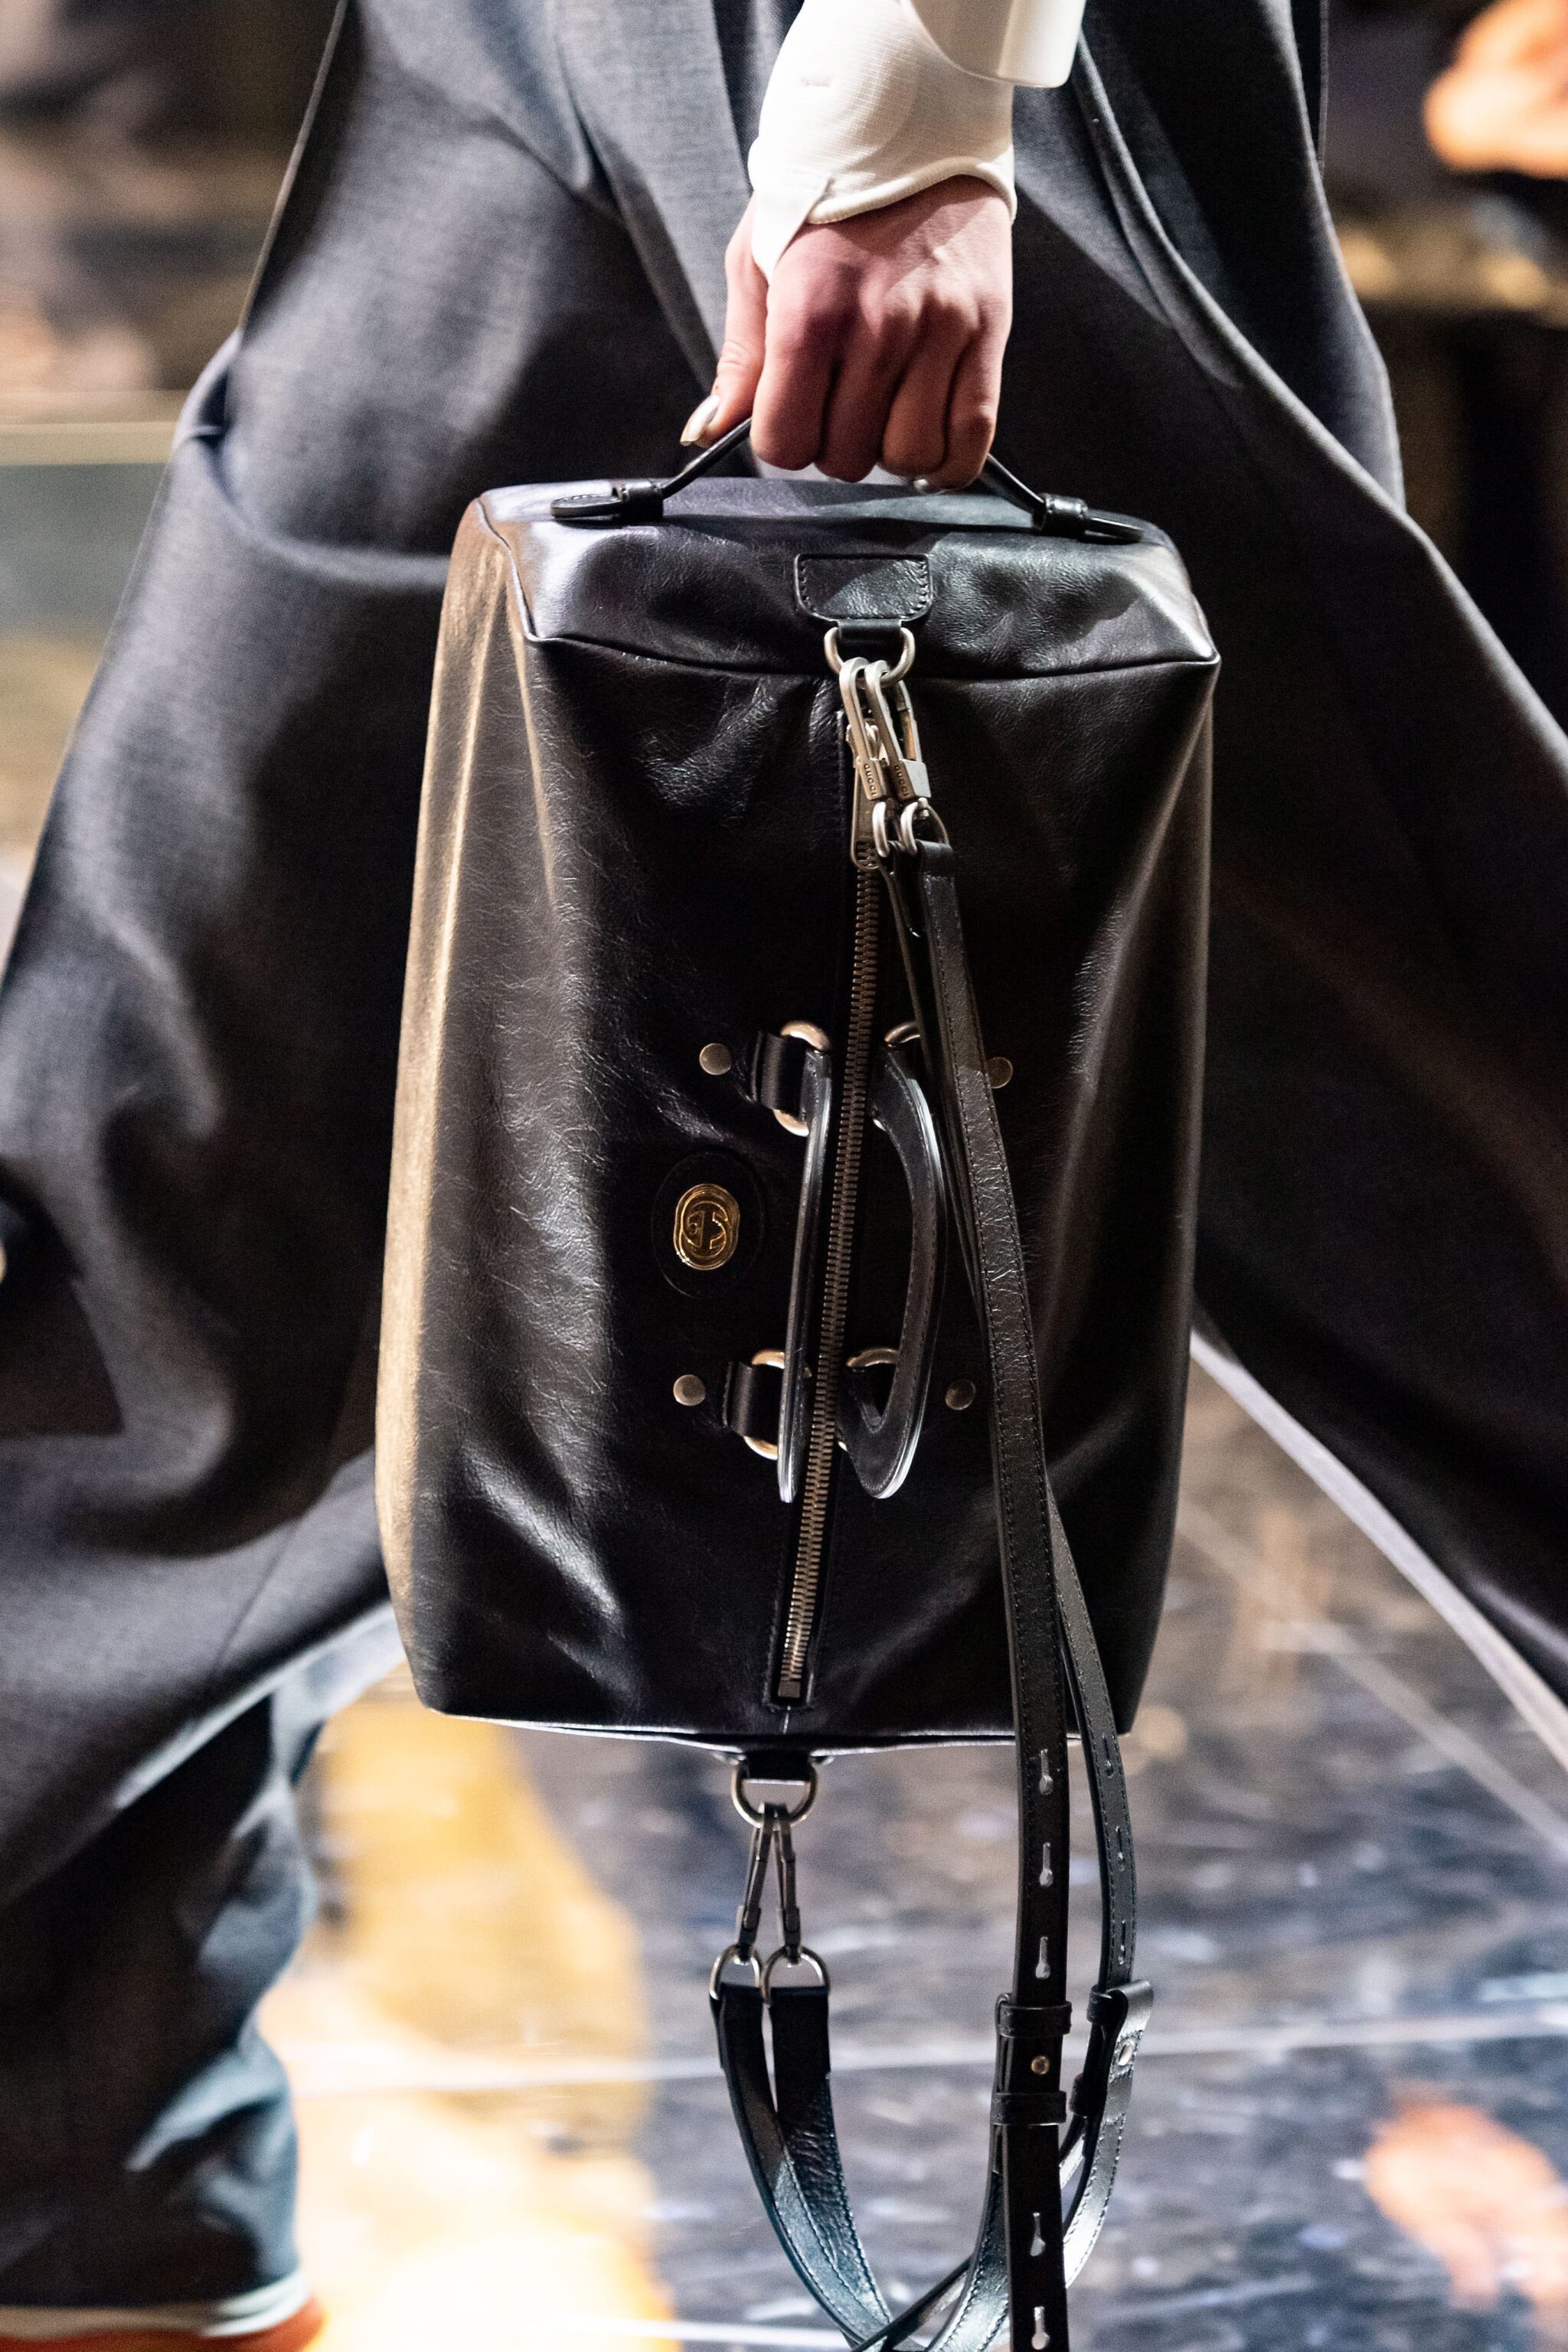 Manifold fremtid mor Gucci Fall/Winter 2019 Runway Bag Collection - Spotted Fashion